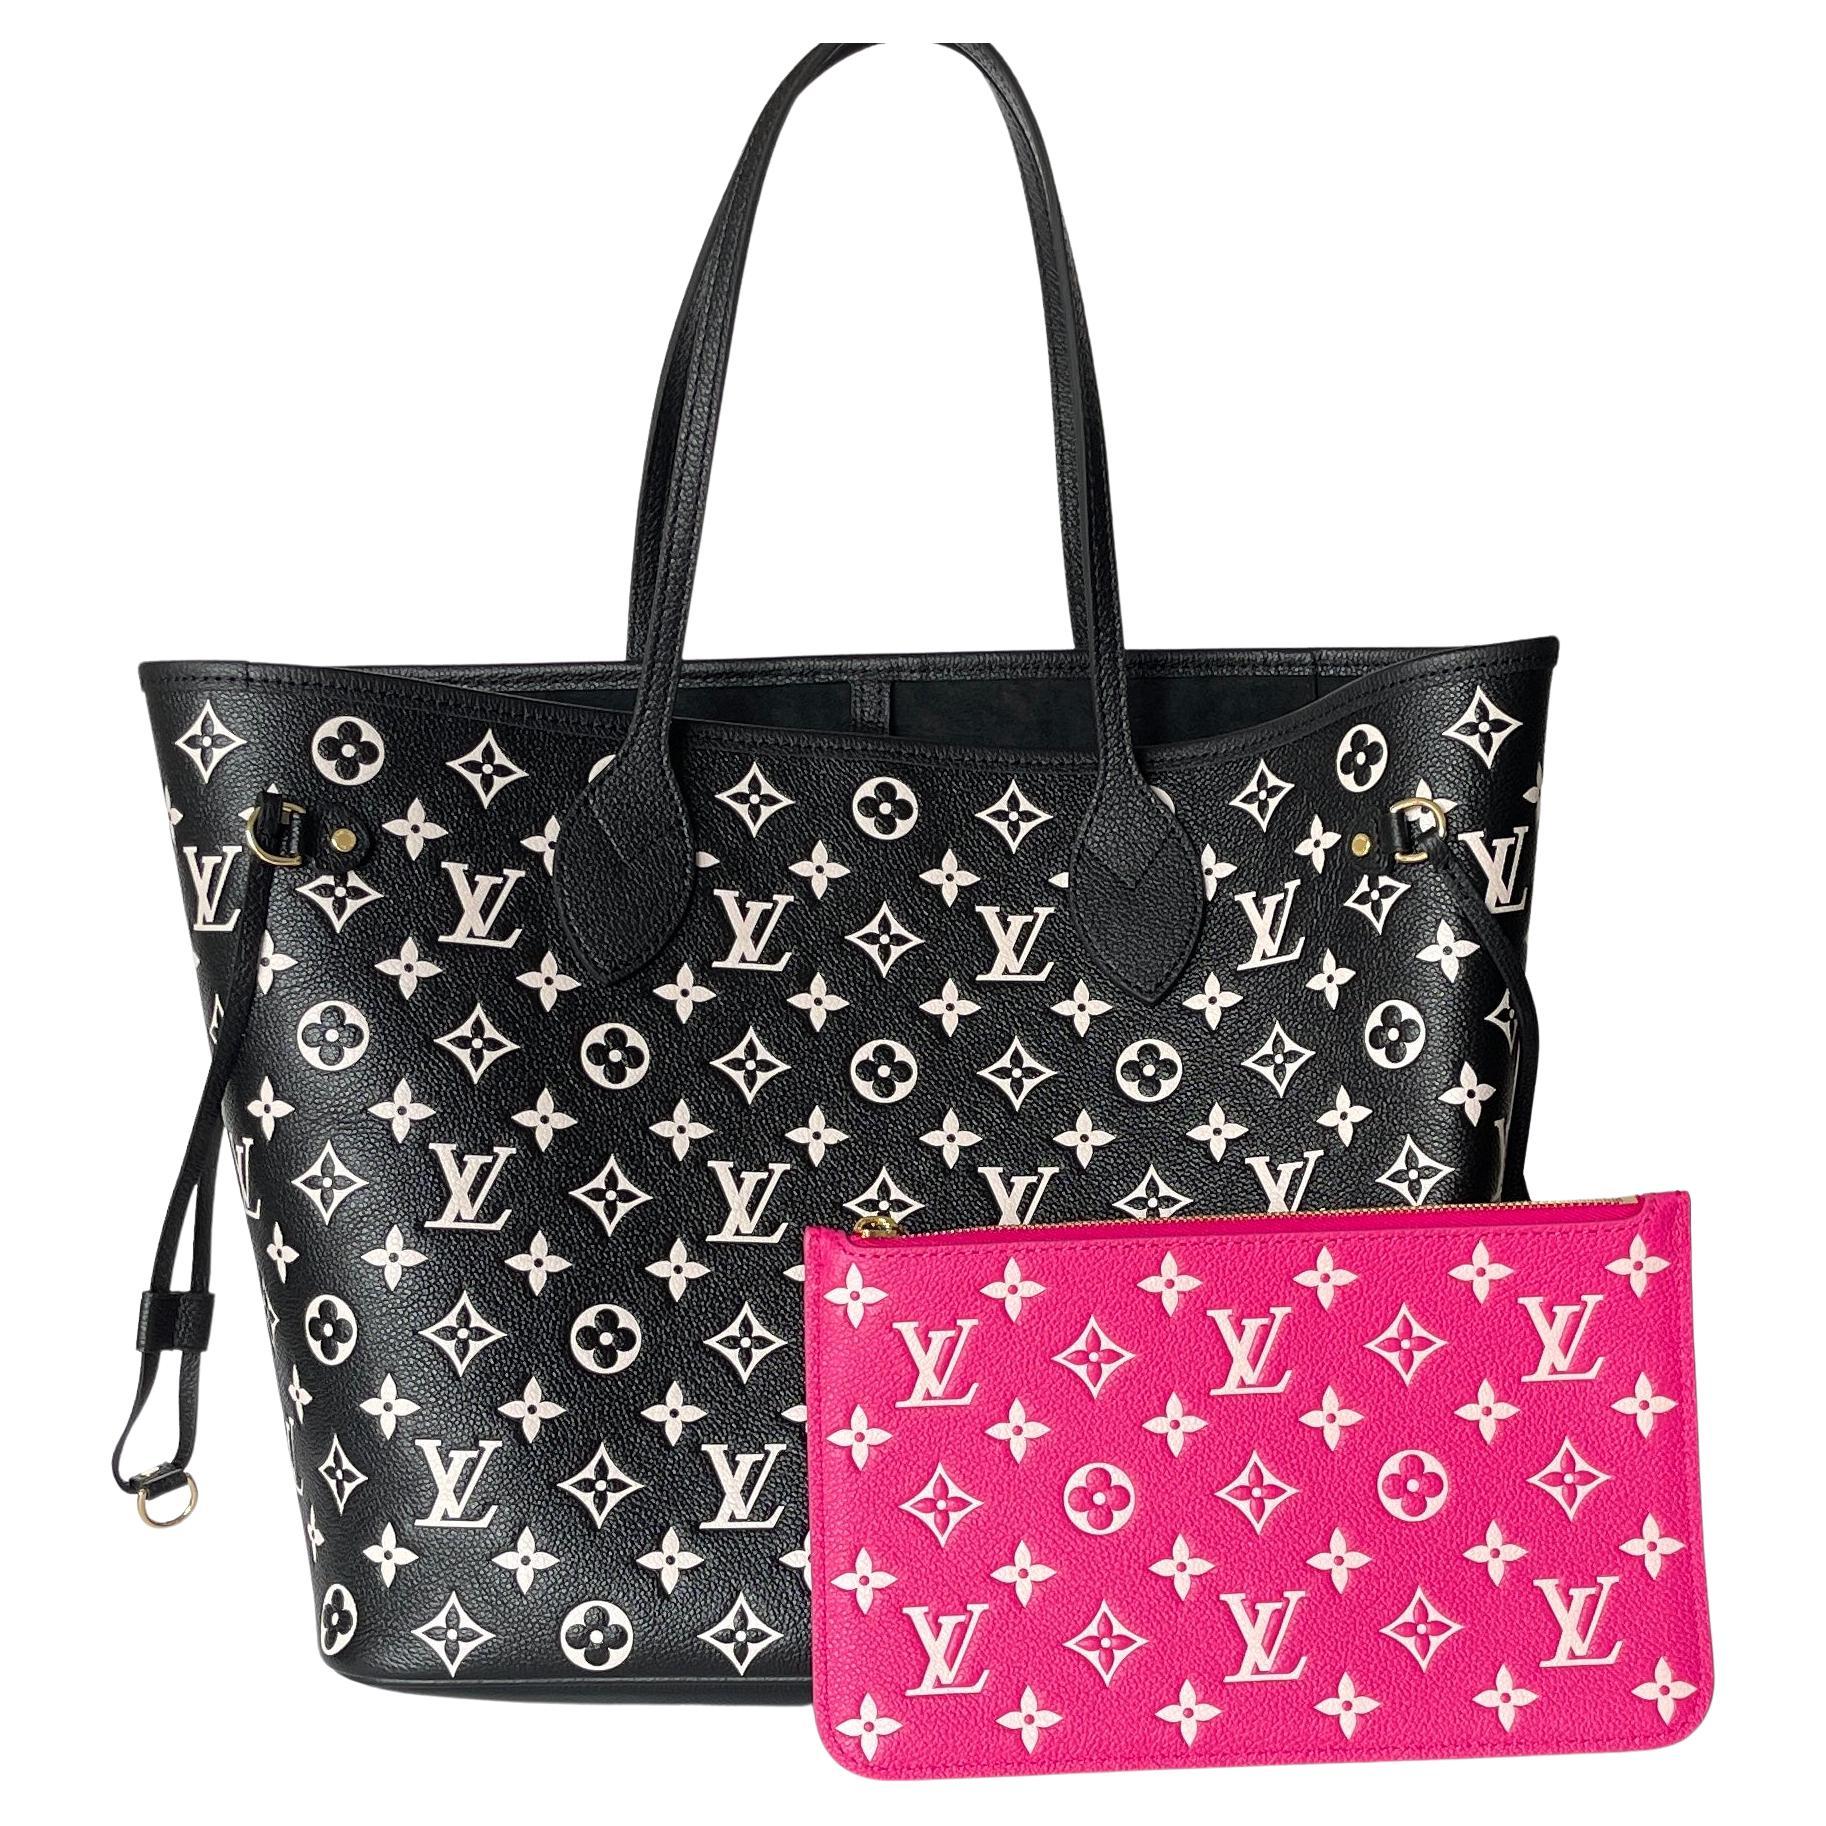 Louis Vuitton Neverfull Black White Empriente Leather M46103 NEVERFULL MM